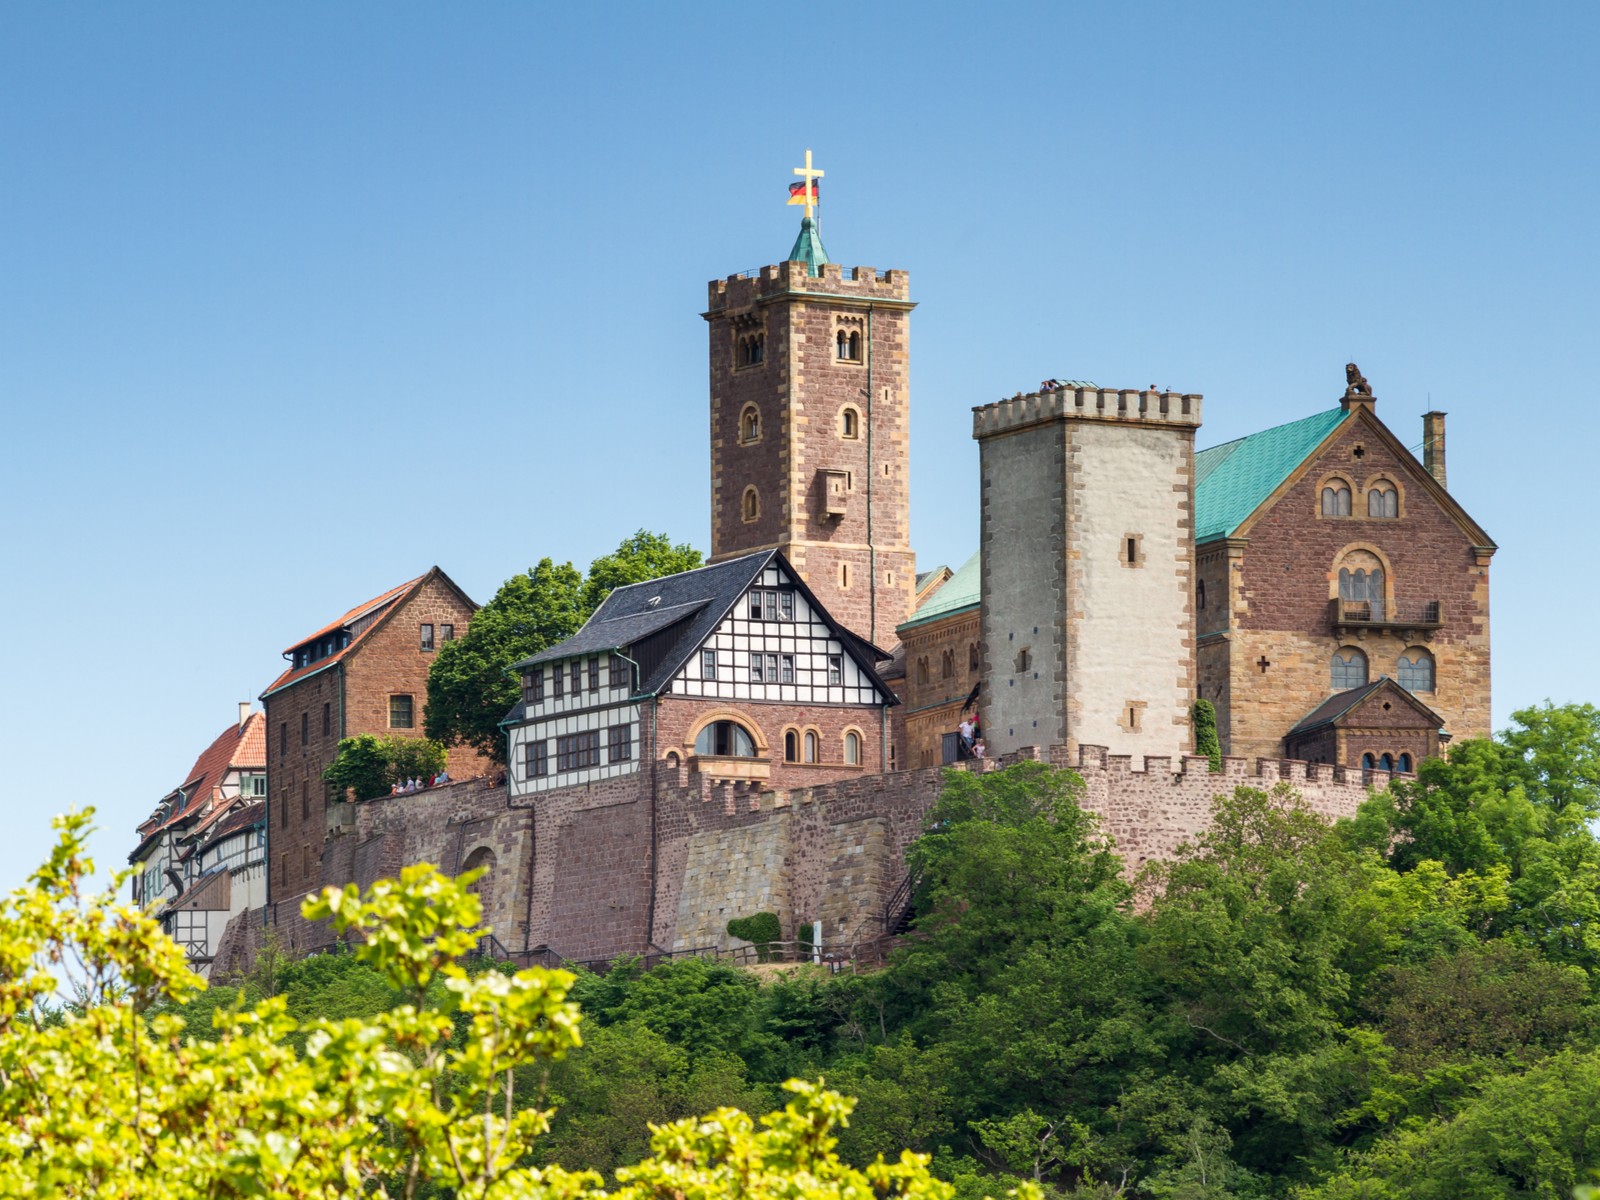 The classic Wartburg Castle, one of the best castles in Germany, a world heritage site at Eisenach where Martin Luther translated the Bible into German surrounded by thick greeneries during Spring